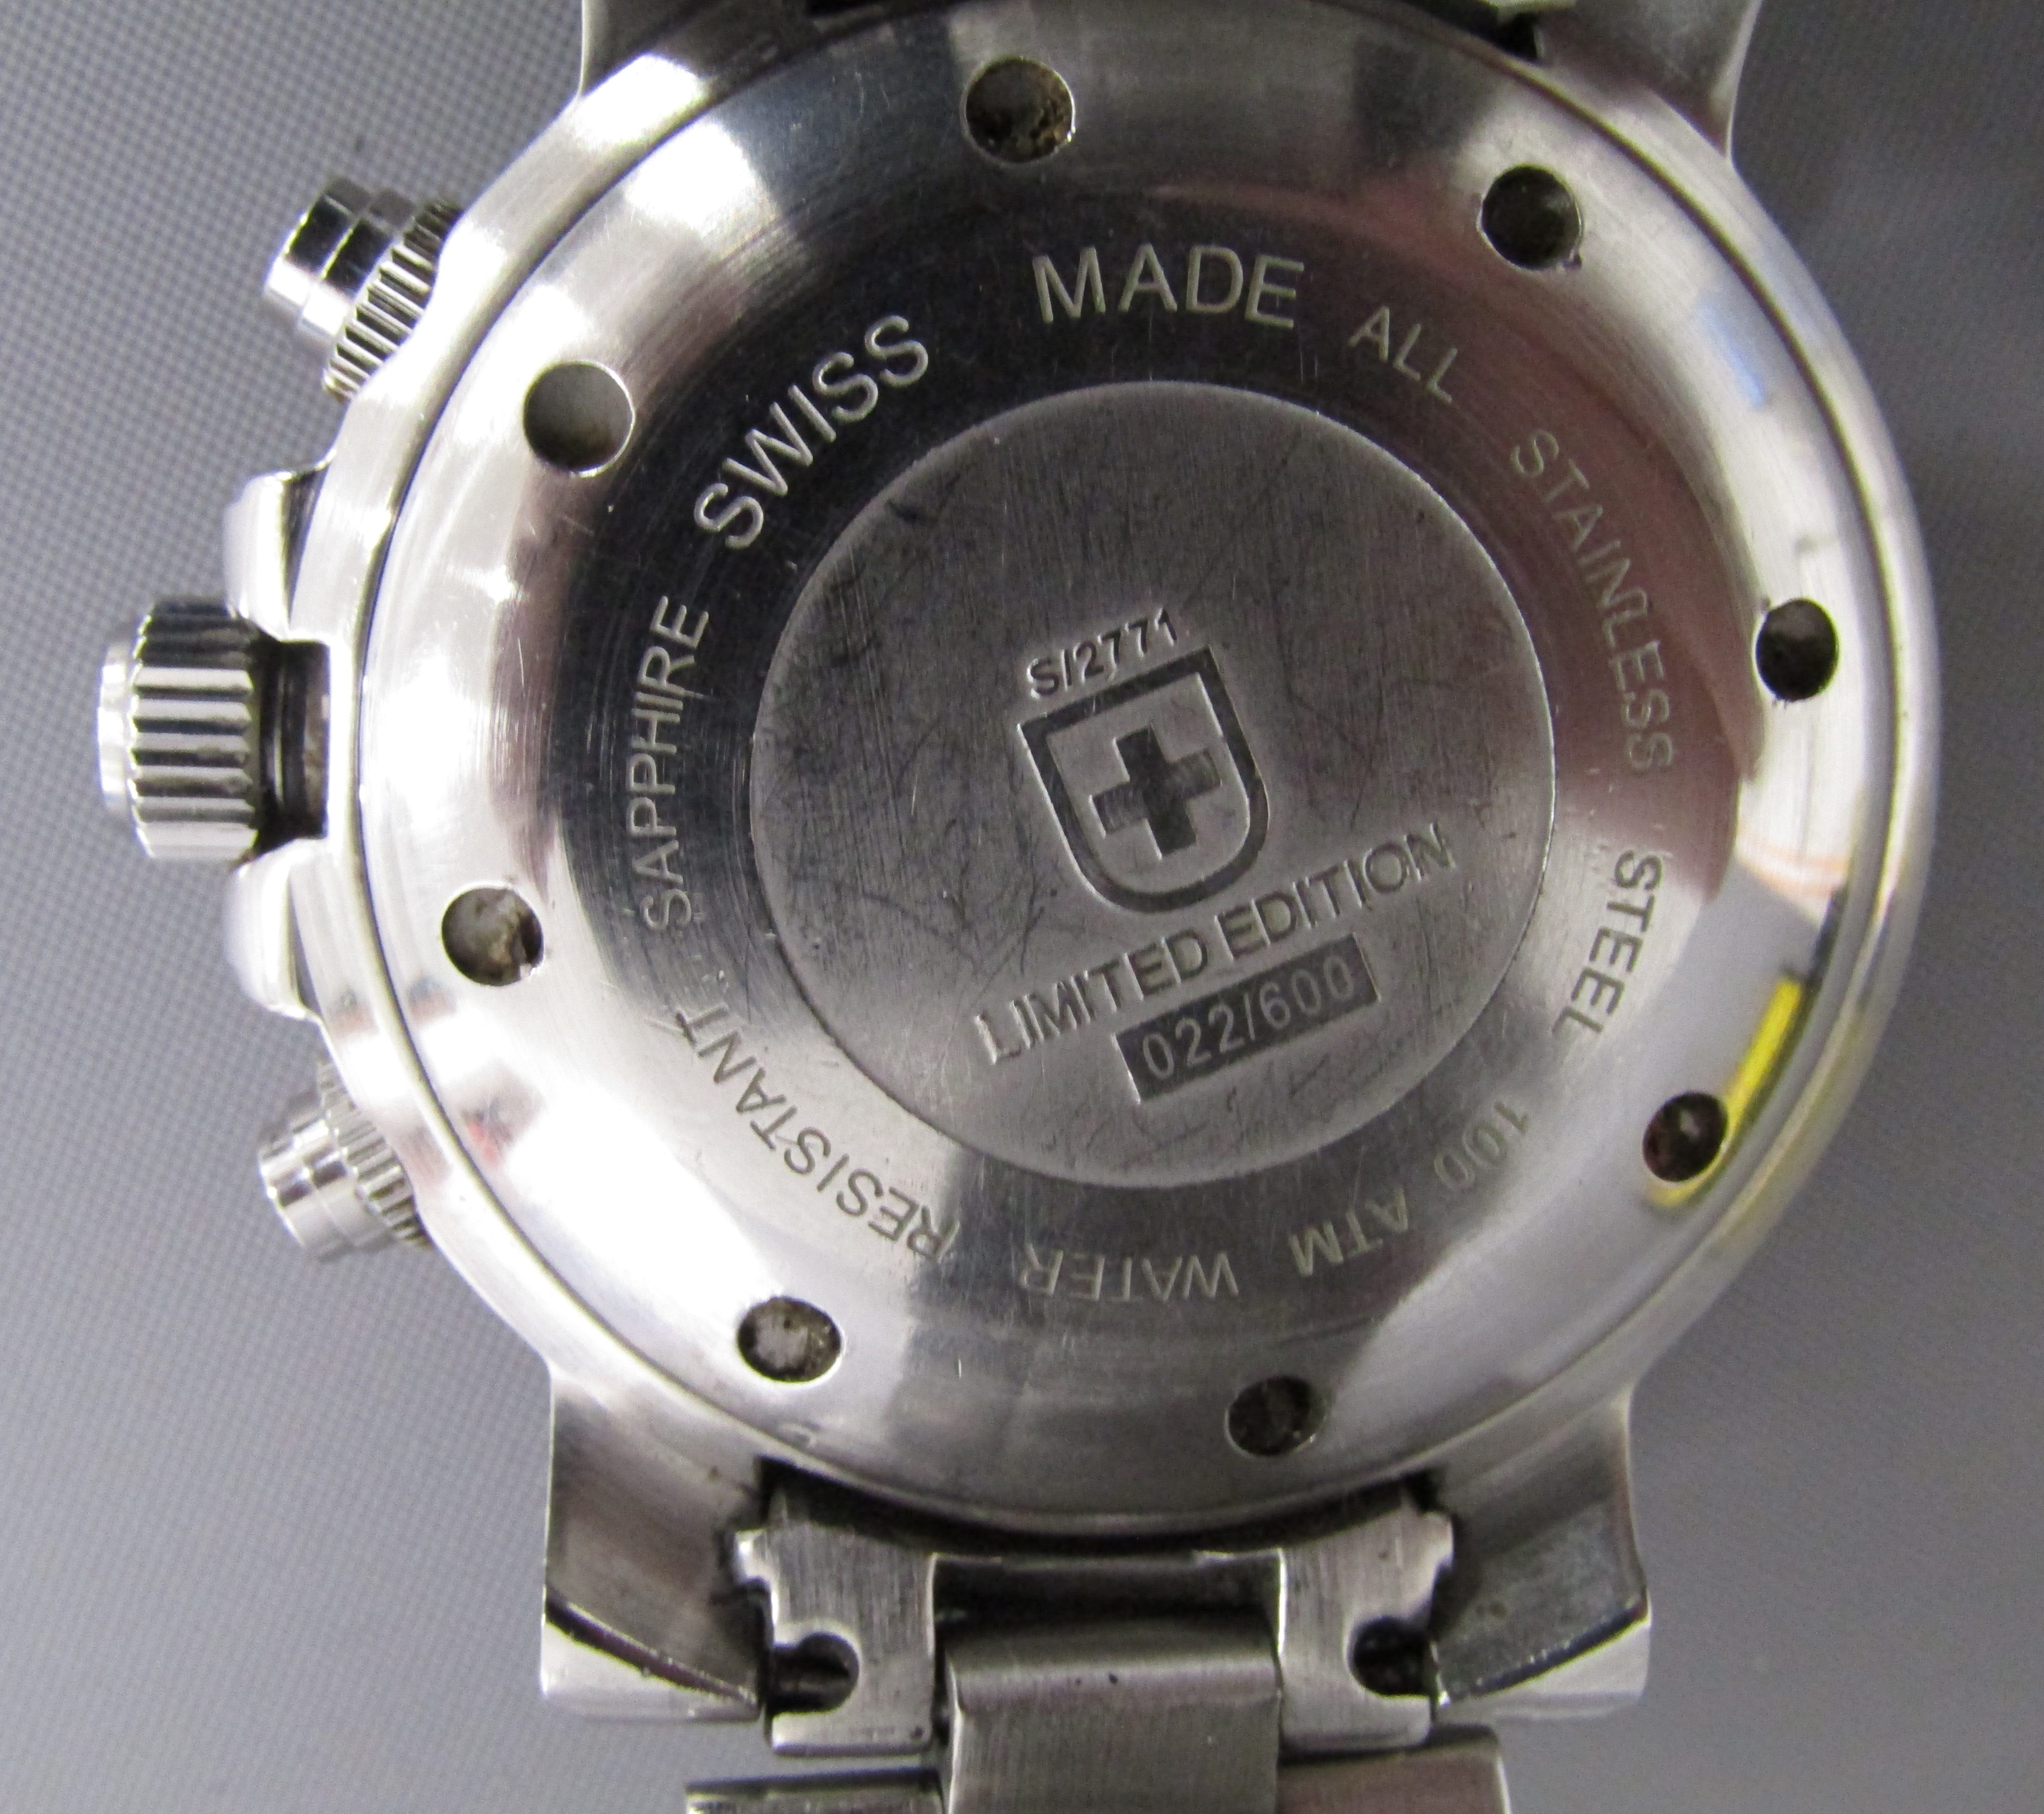 Swiss Military S/2771 limited edition wristwatch - damage to crystal - Image 8 of 8